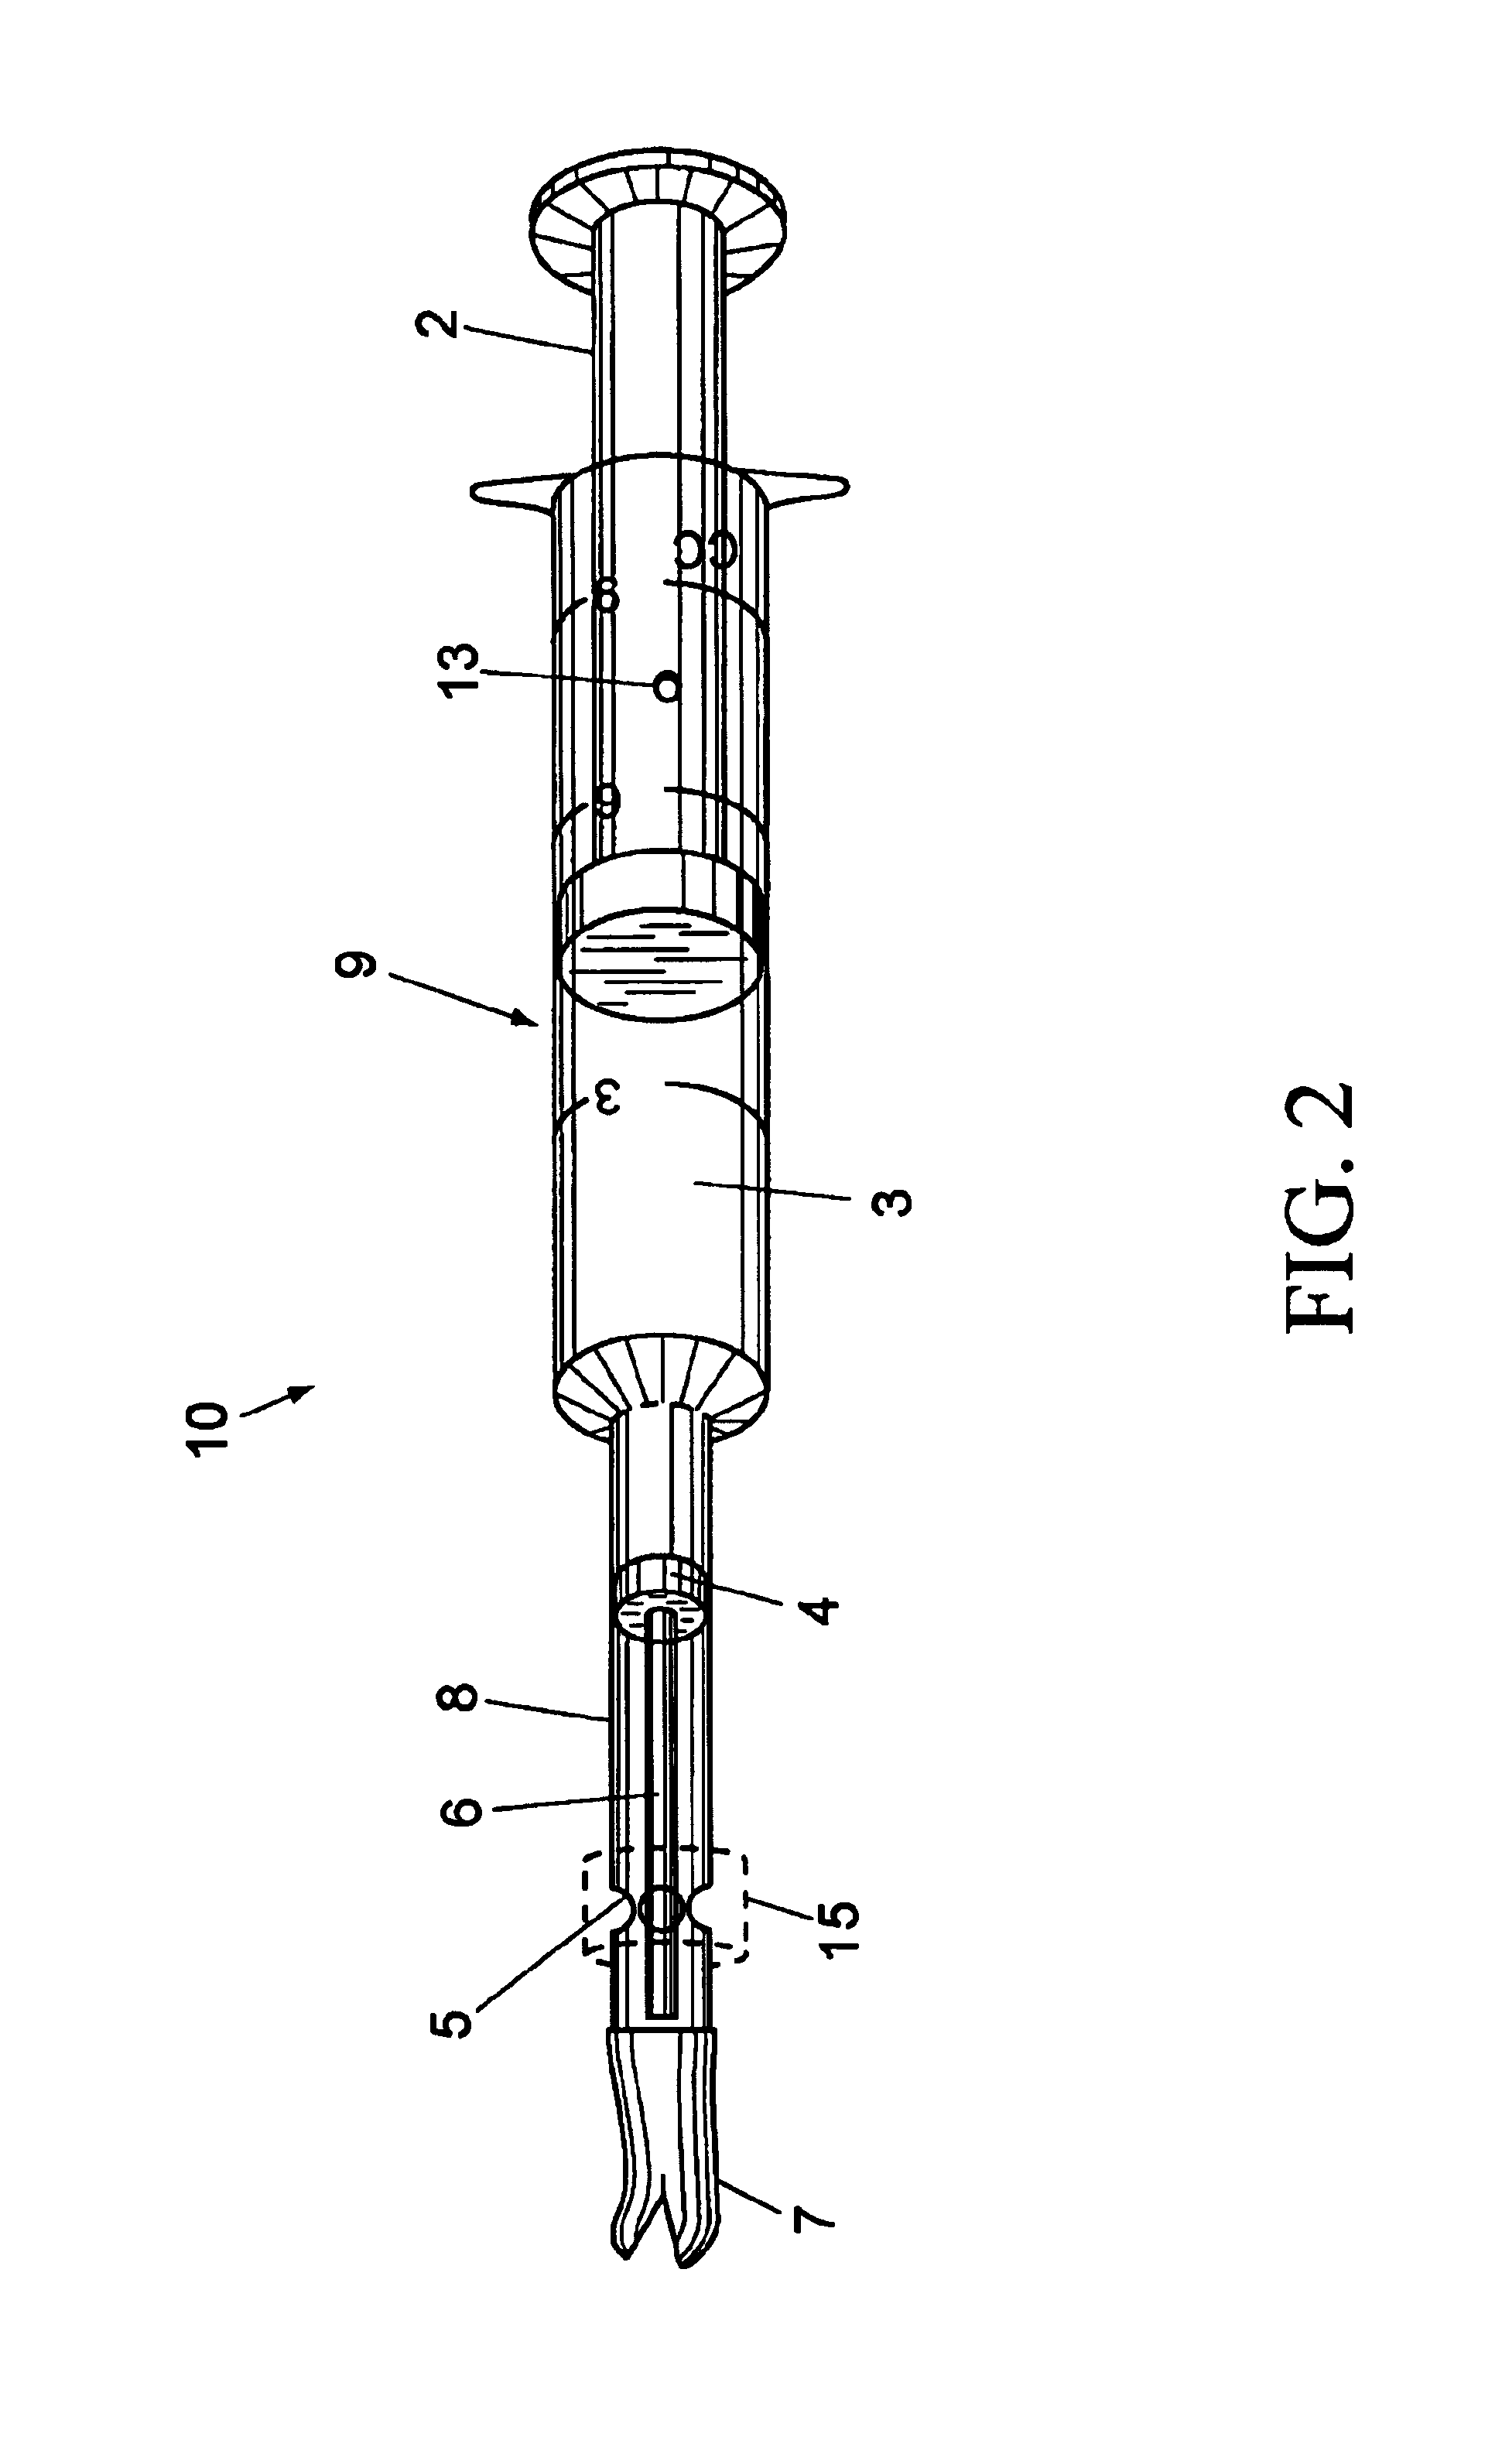 Veterinary pill and capsule delivery device